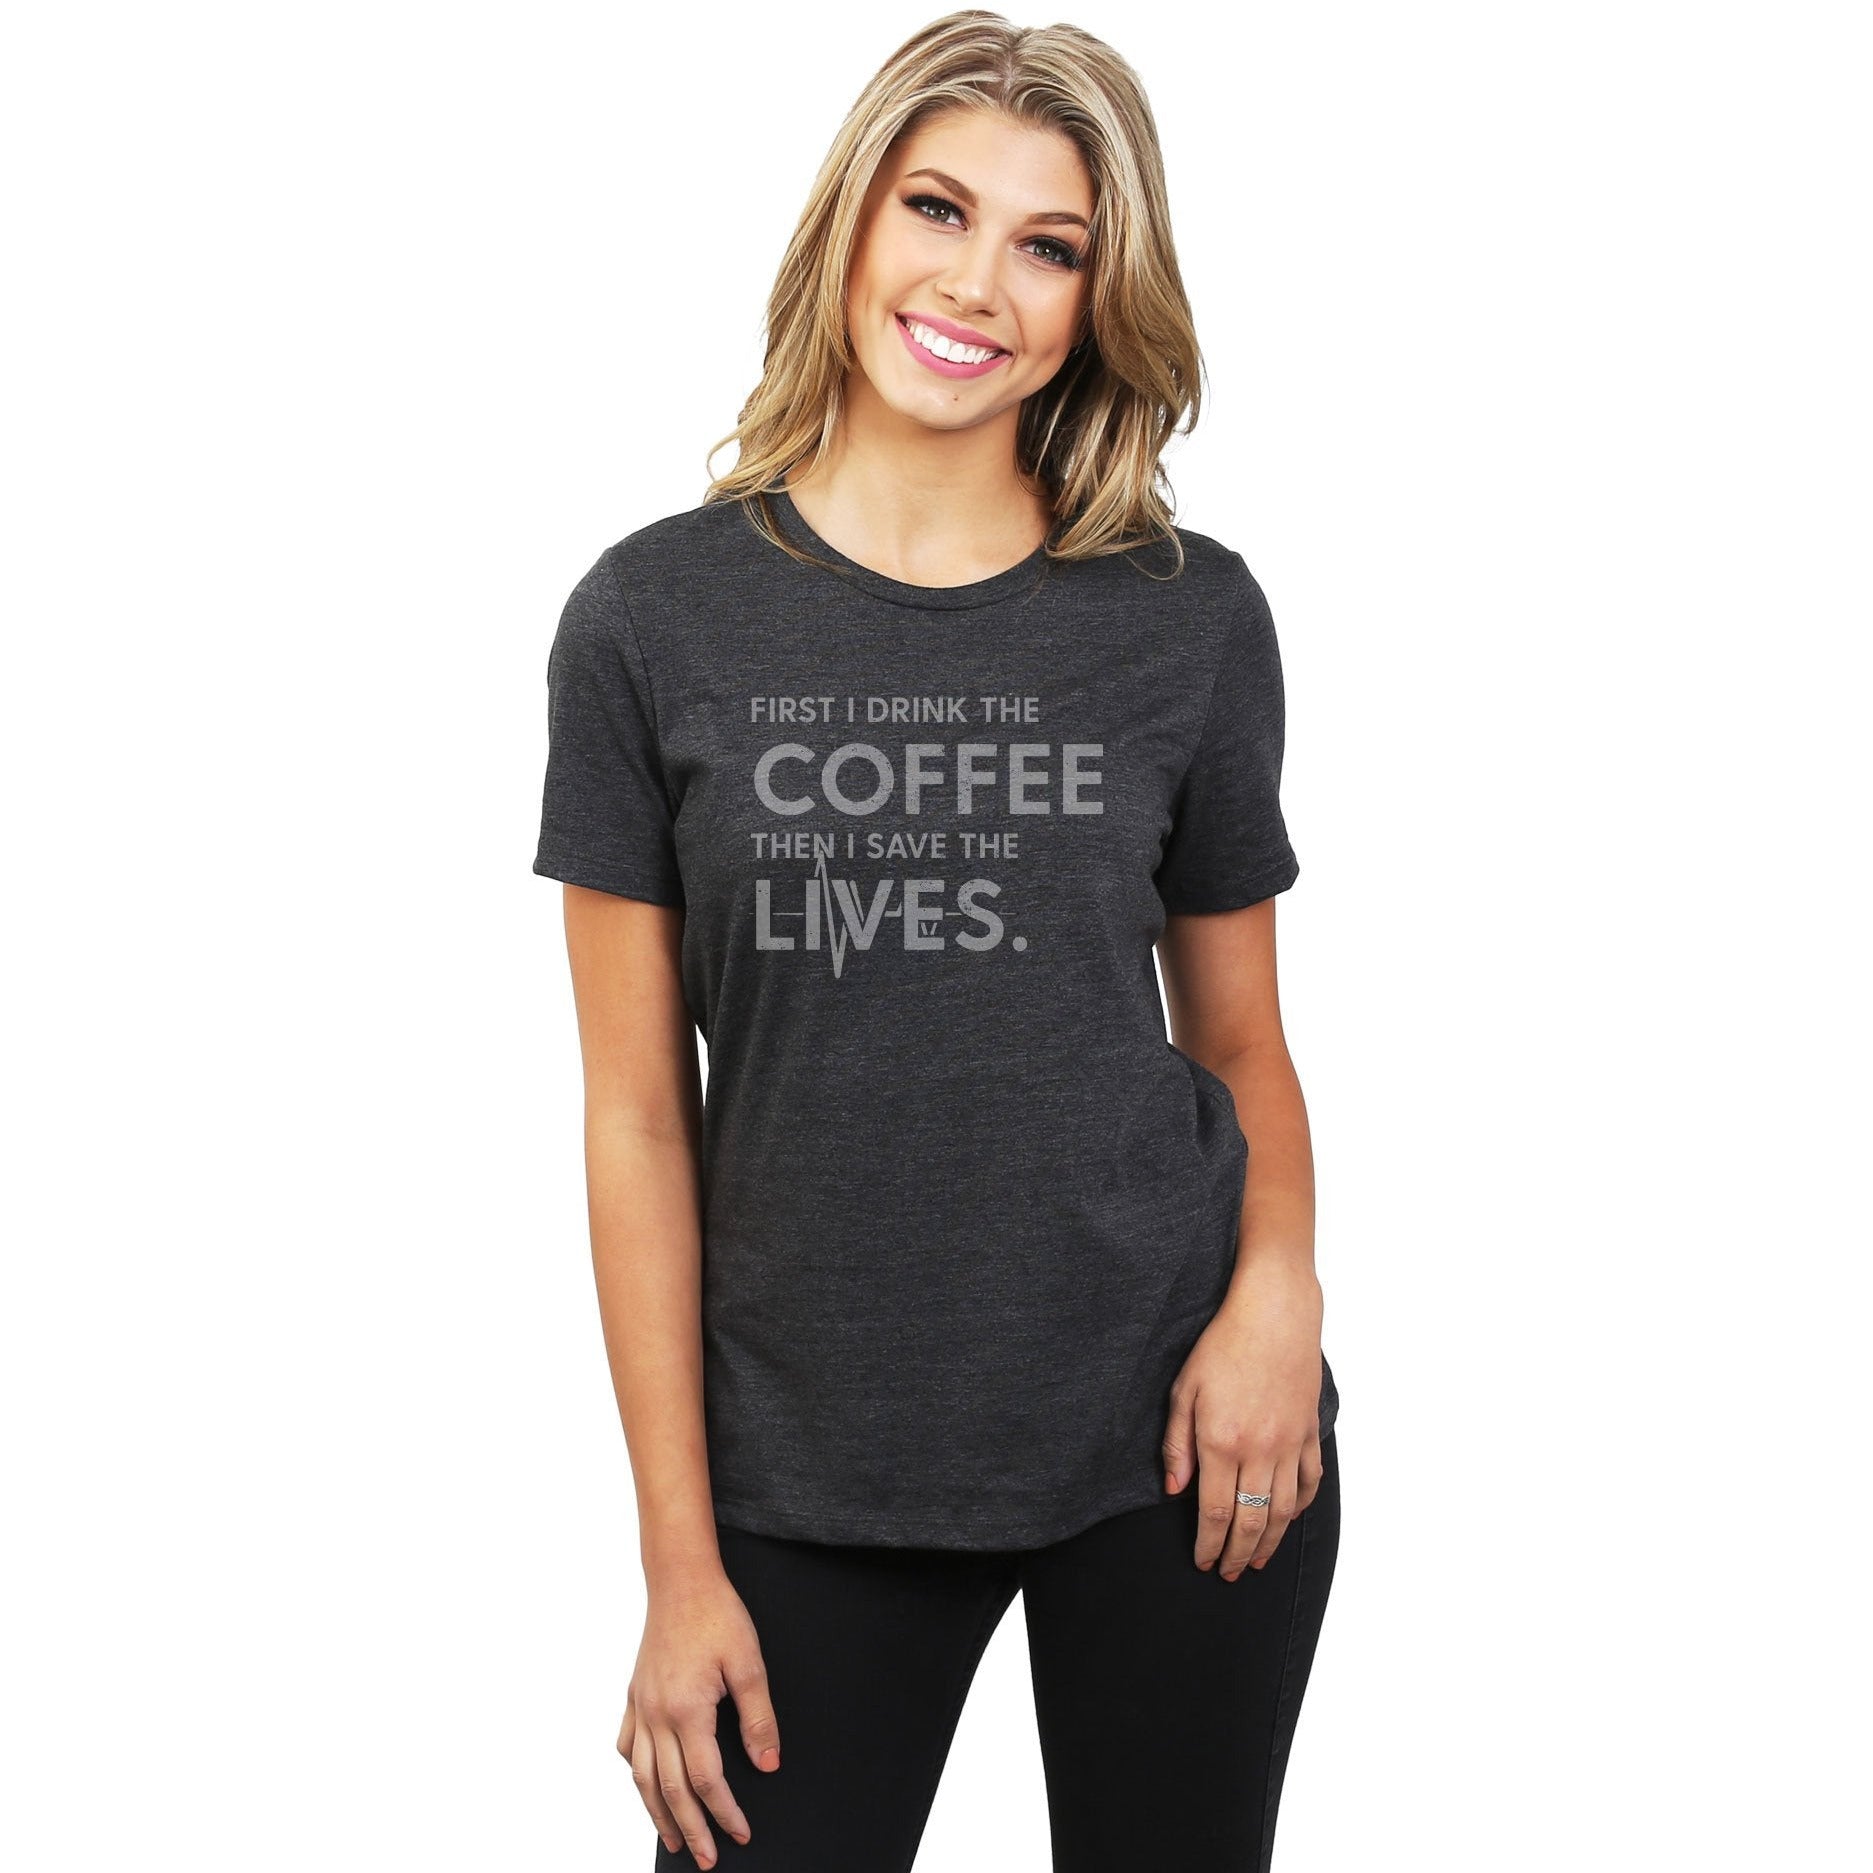 First I Drink The Coffee Then I Save The Lives Women's Relaxed Crewneck T-Shirt Top Tee Charcoal Model
